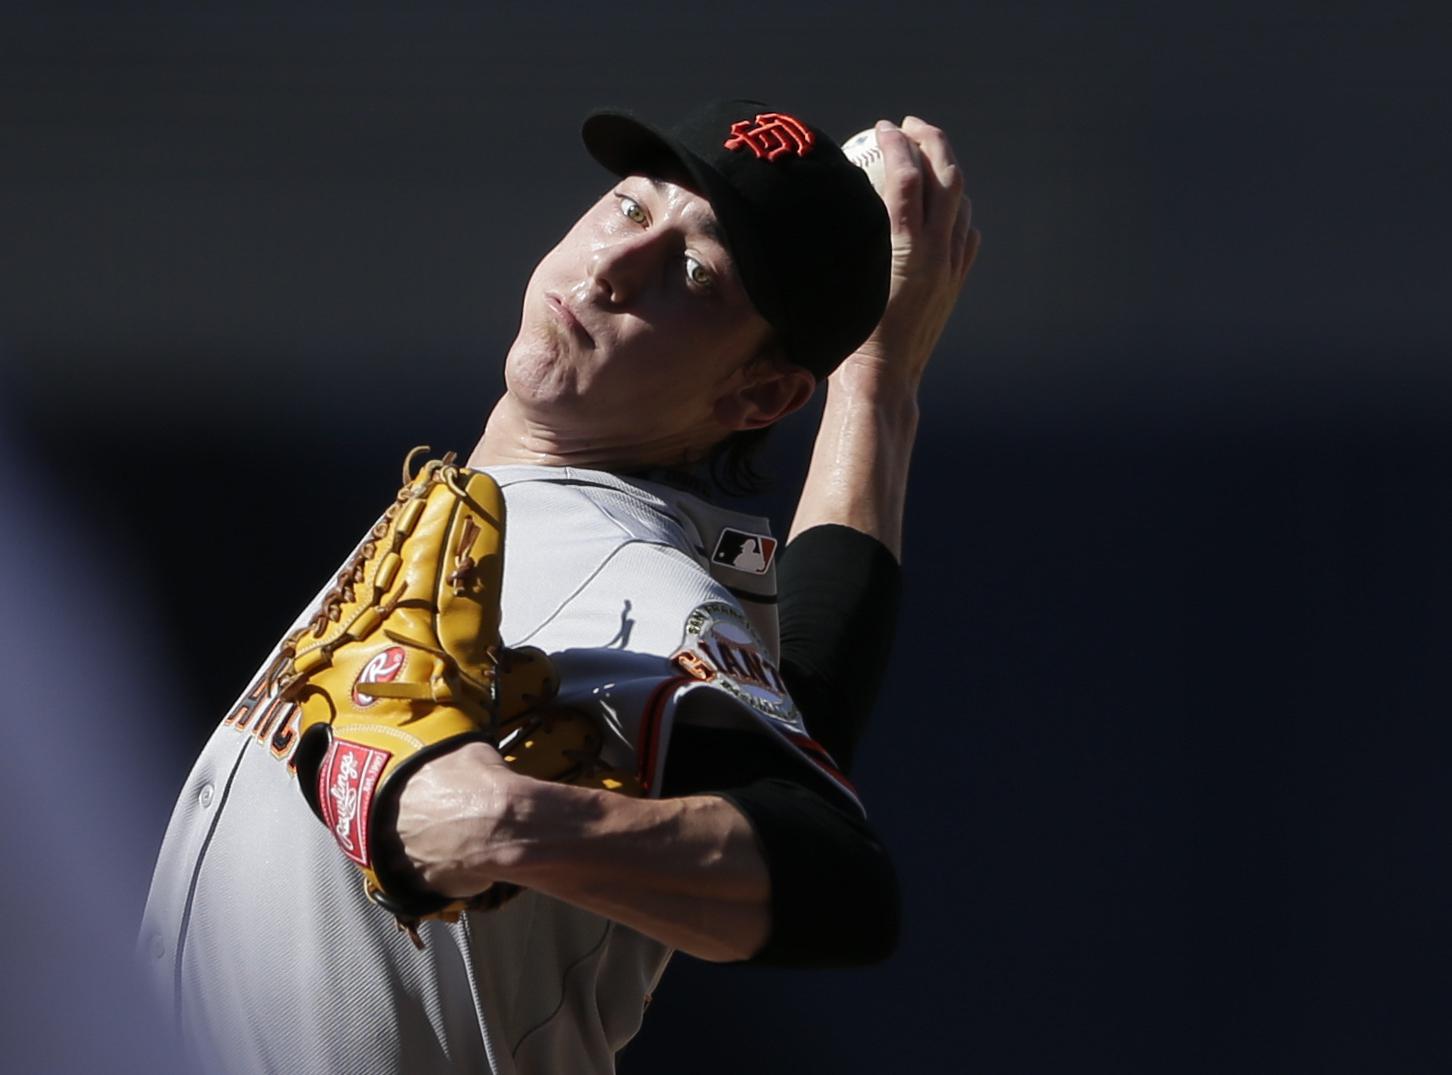 Why Tim Lincecum got my HOF vote, without thinking twice